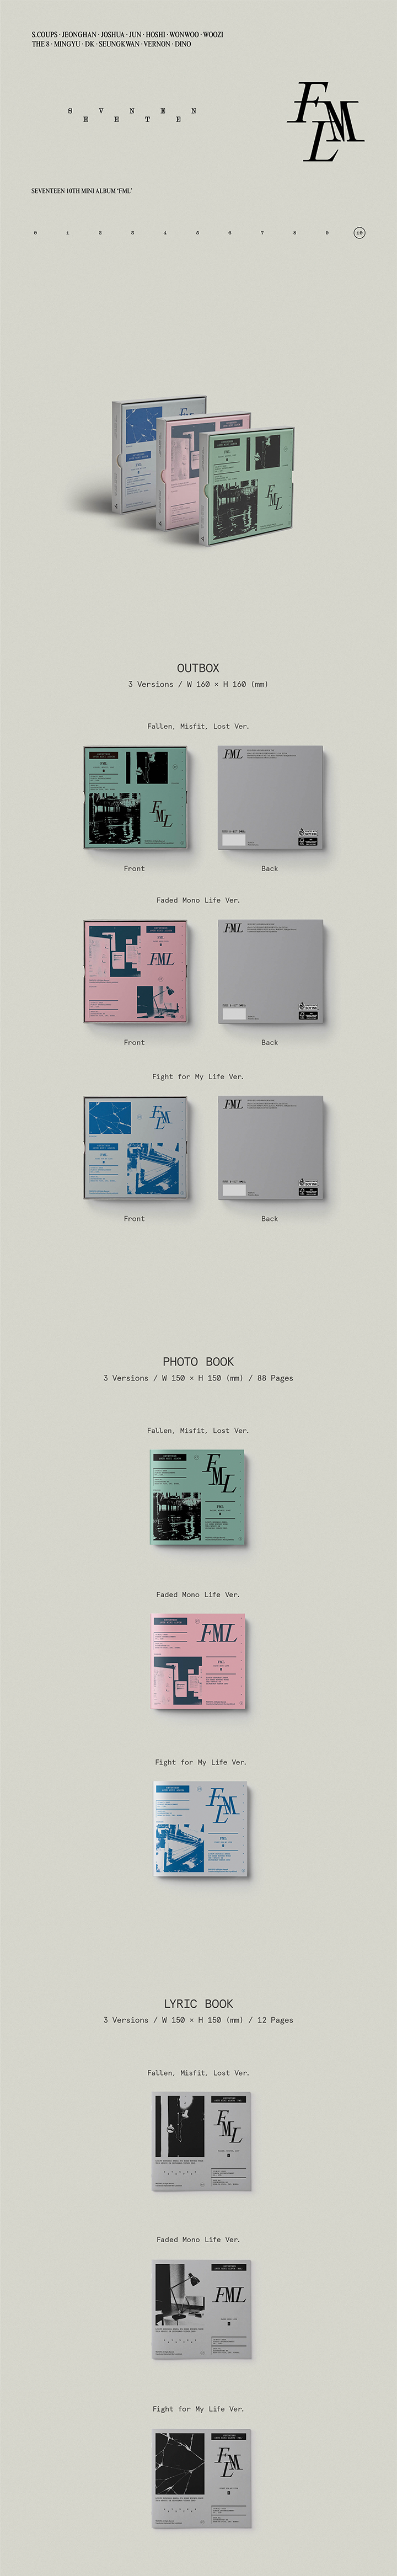 Free UK Tracked Shipping for SEVENTEEN [FML] 10th Mini Album with pre-order benefit POB photocard ktown4u gift for sale. Buy from a huge collection of official merch at the best online kpop store marketplace. Buy BTS SVT TWICE & TXT at our k-pop shop. Hanteo & Circle Korean charts. BT21 plushies sold at Chuchucherry.